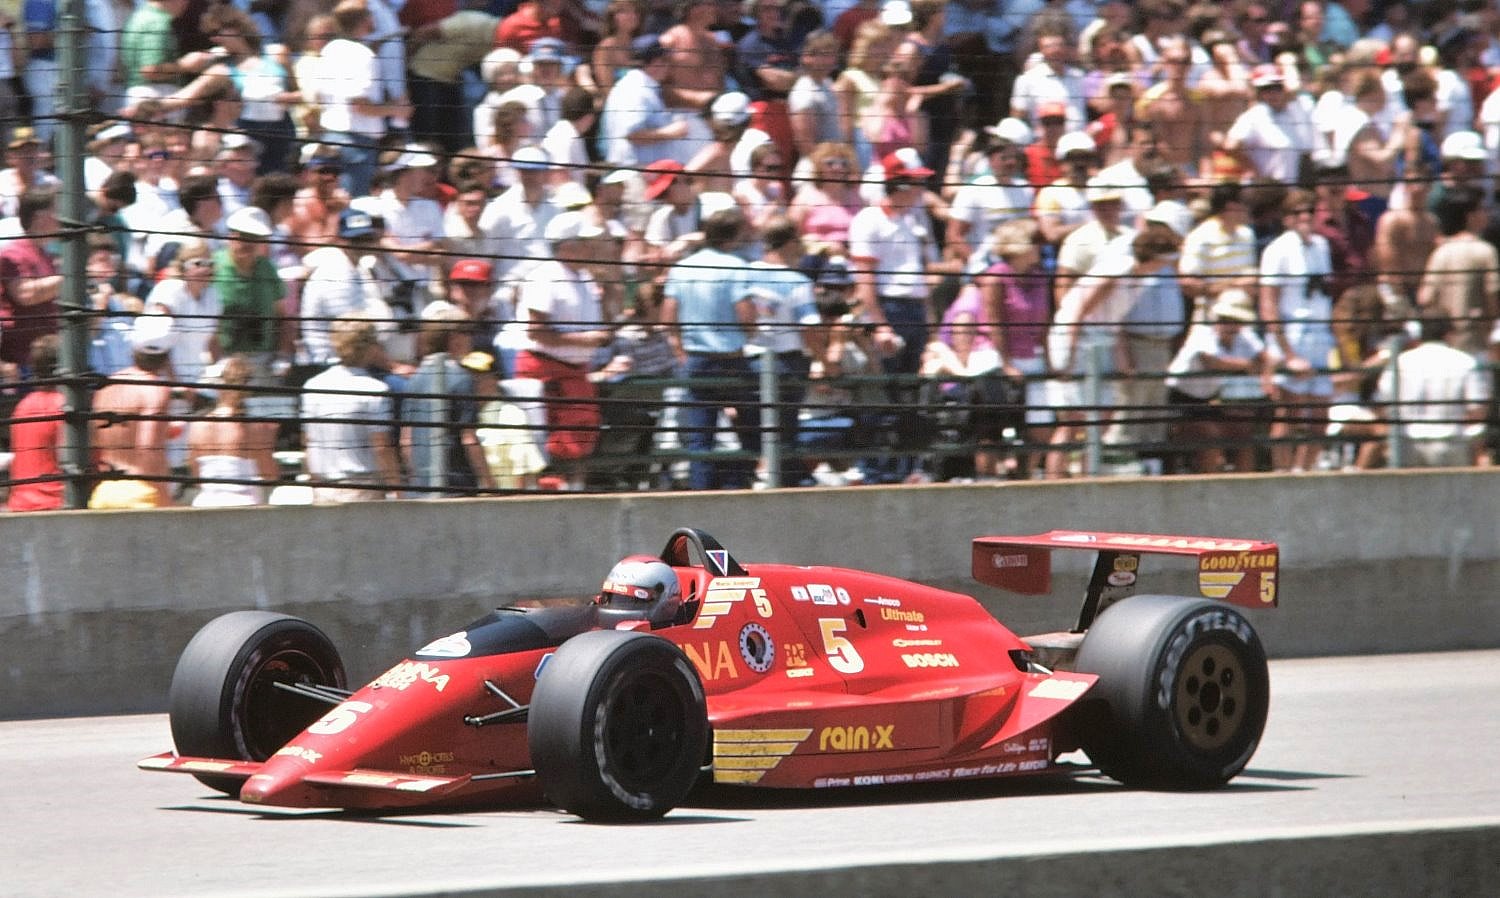 Mario Andretti completely dominated the 1987 race, but a broken valve spring with 13 laps to go gifted the win to Al Unser Sr.